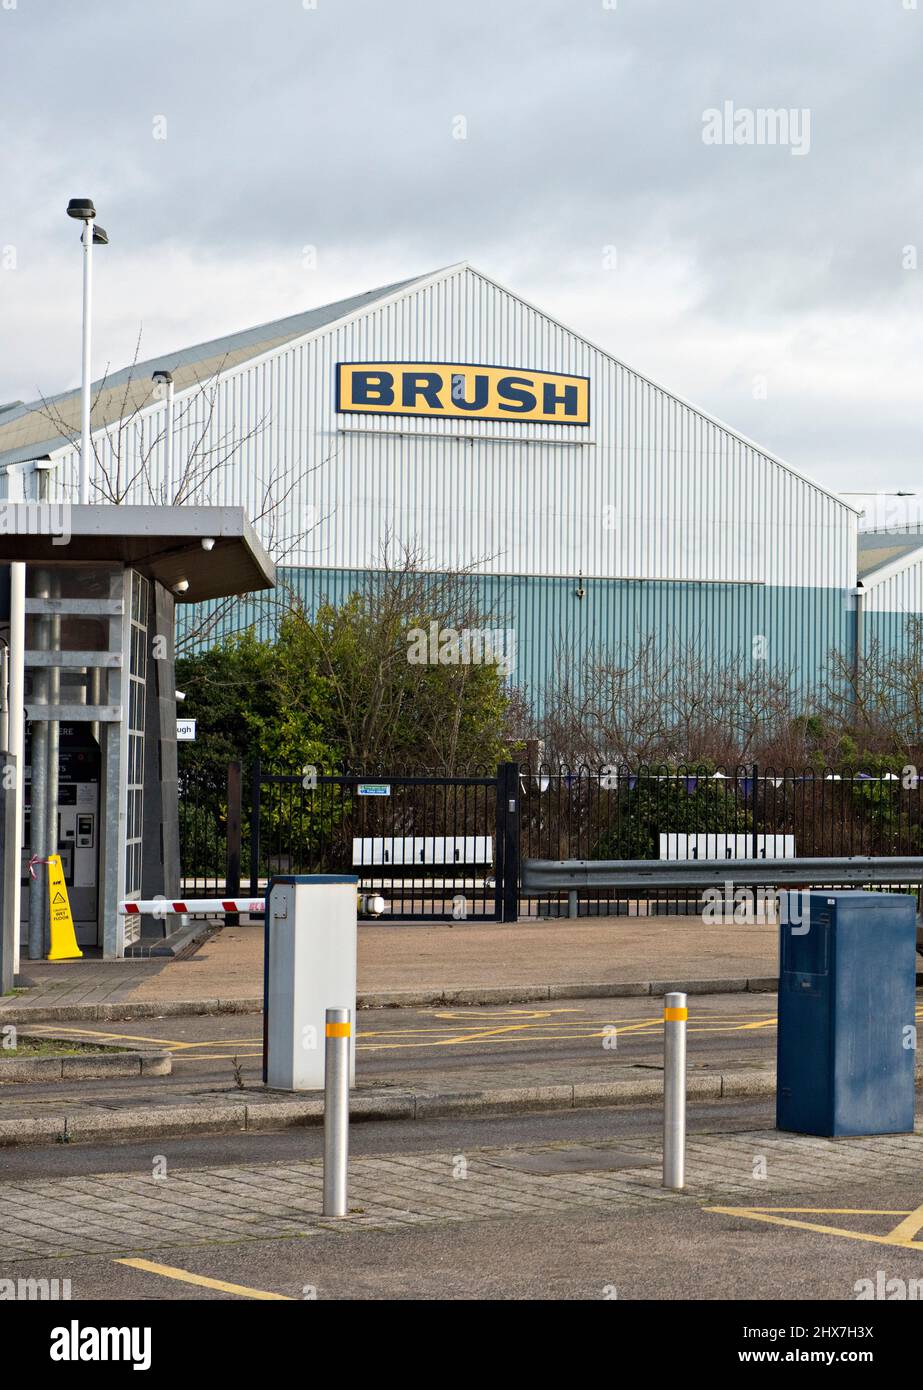 The logo over the now closed Brush Traction factory, a subsidary of Wabtec, in Loughborough, UK Stock Photo